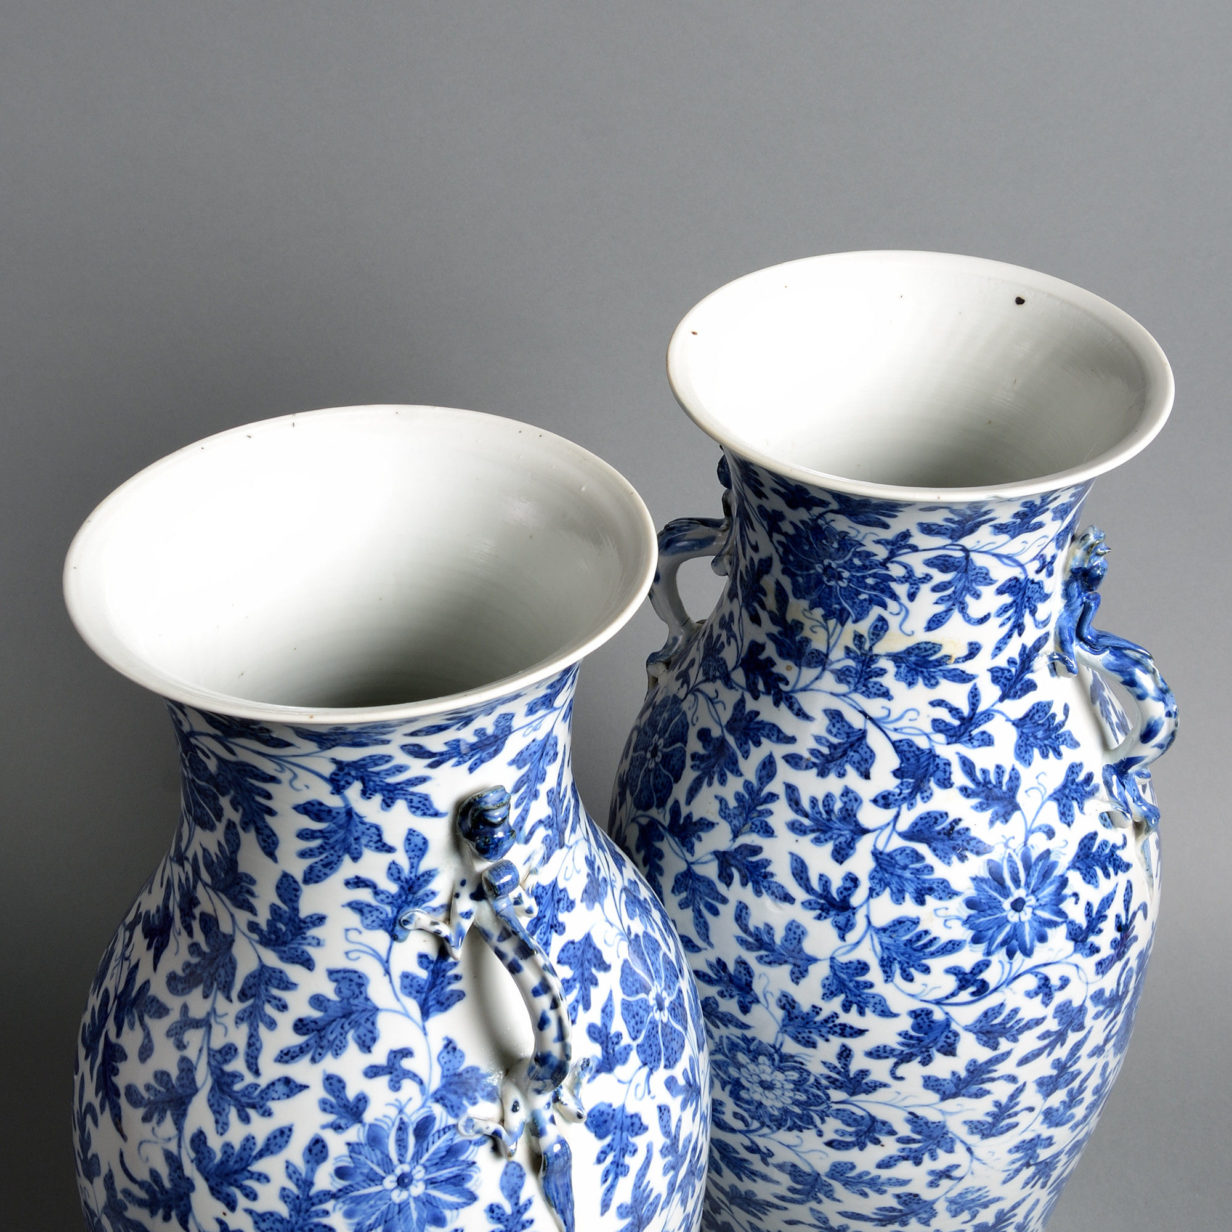 A pair of 19th century qing dynasty blue and white porcelain vases